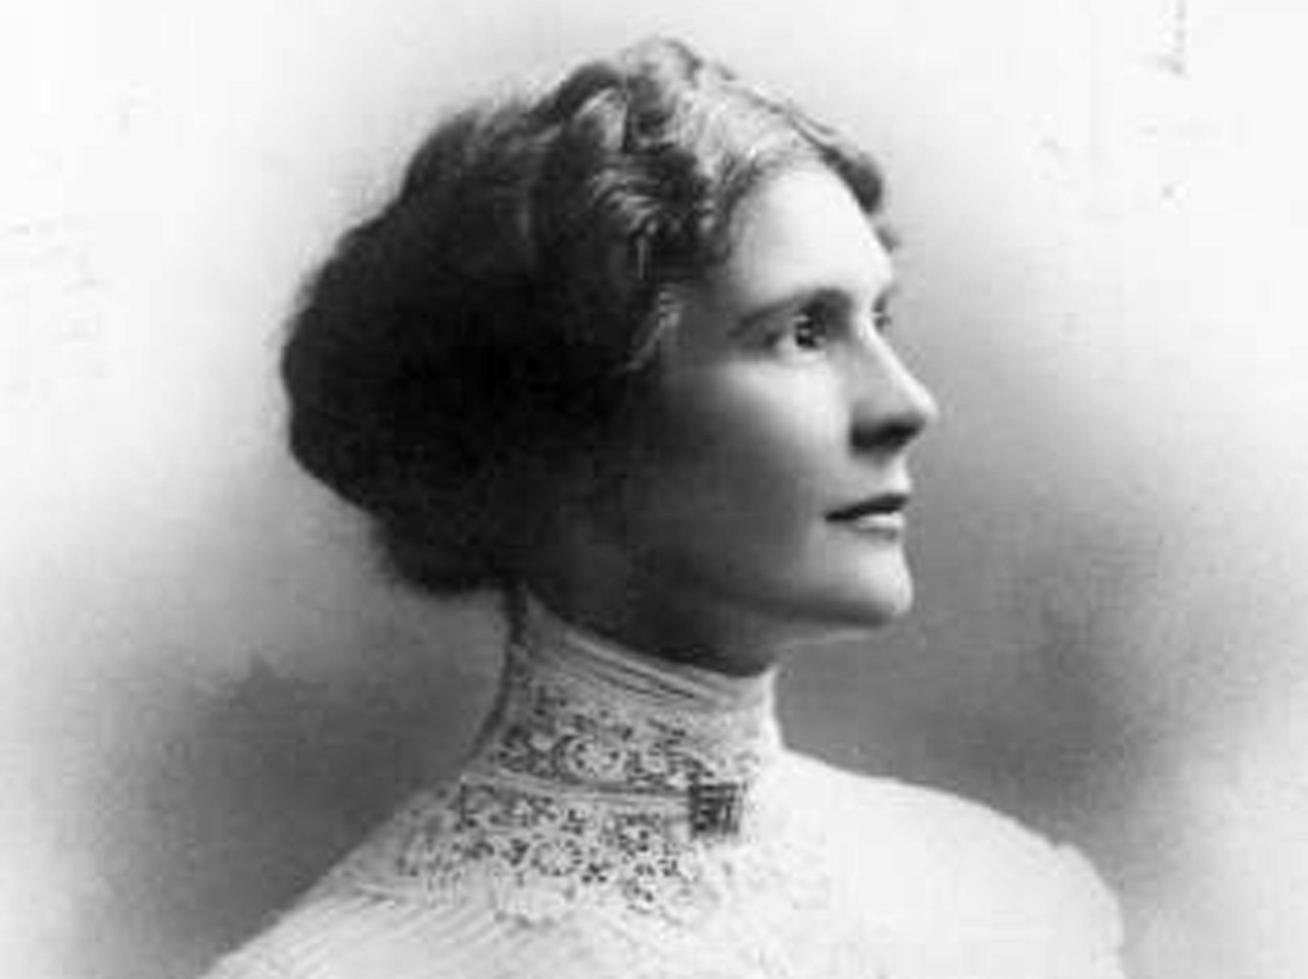 A Suffragette born in Leeds. She became a pupil teacher aged just 13 and was qualified by the age of 21. She became active in her trade union and a supporter of the Independent Labour Party, where she was proven to be a fluent speaker.